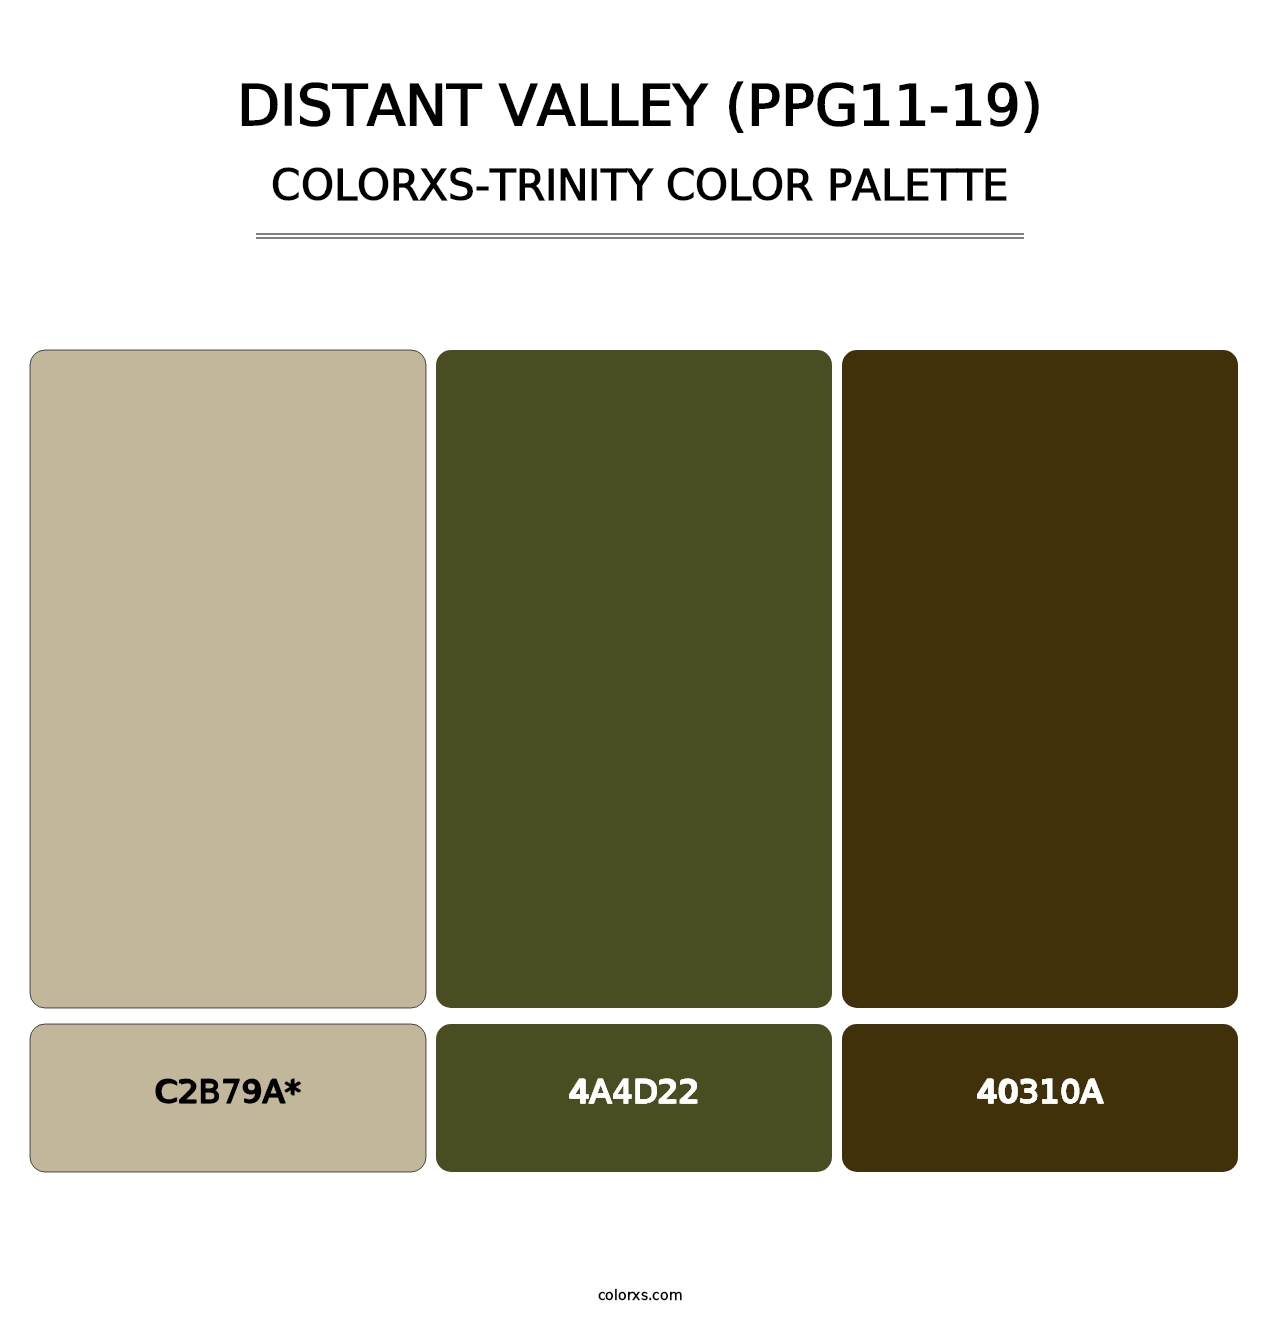 Distant Valley (PPG11-19) - Colorxs Trinity Palette